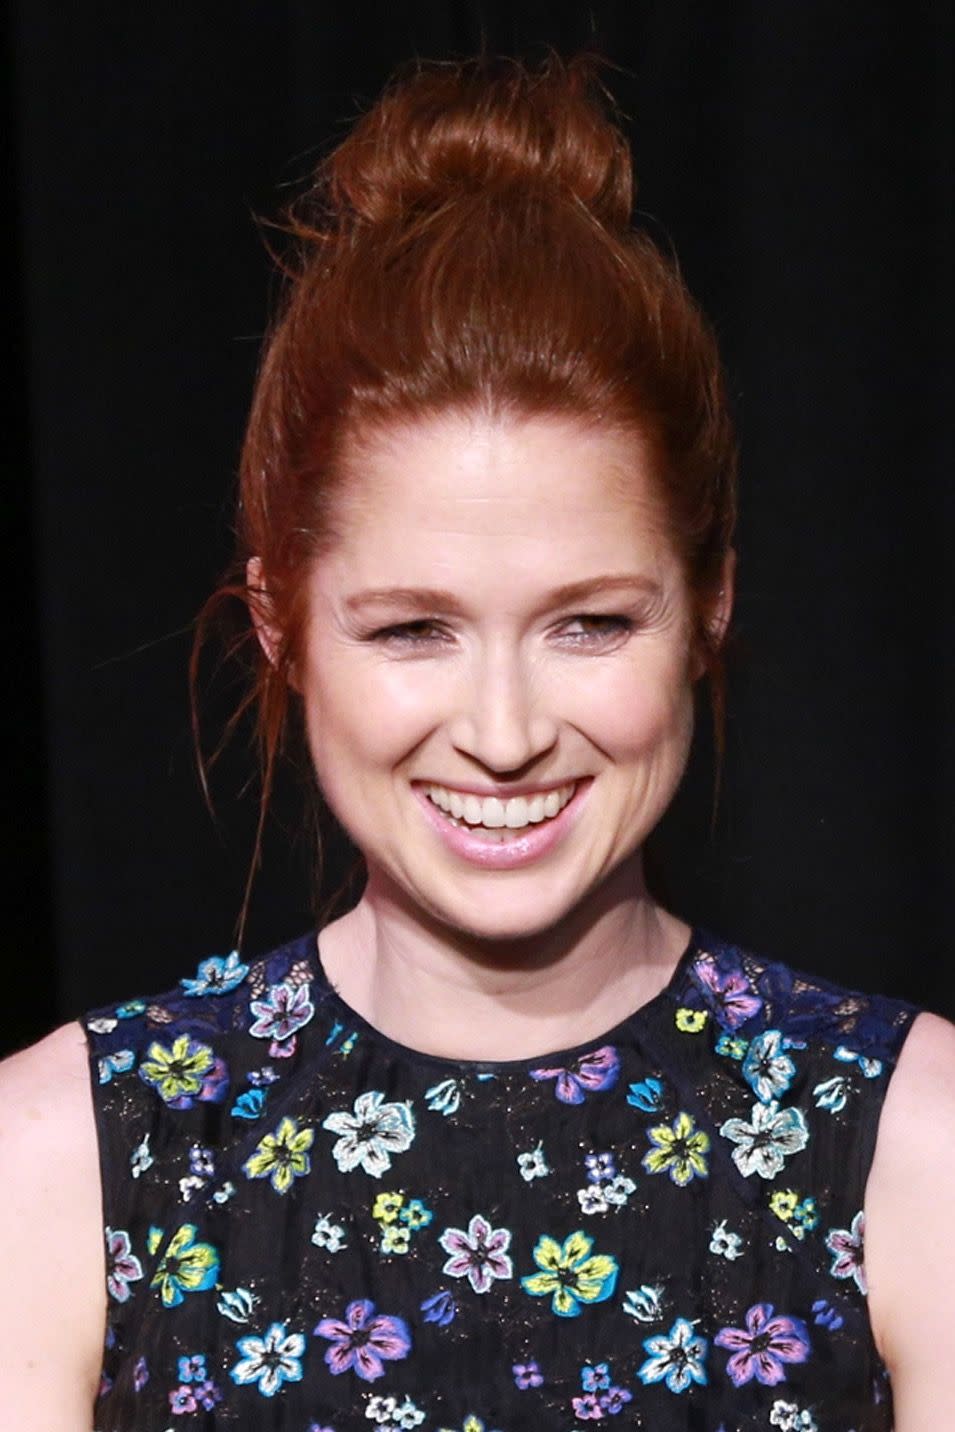 <p>A smaller topknot can help create a fuller look, too, as actress <strong>Ellie Kemper </strong>proves. Leave the base looser so it naturally rounds out a bit more before securing the bun.</p>